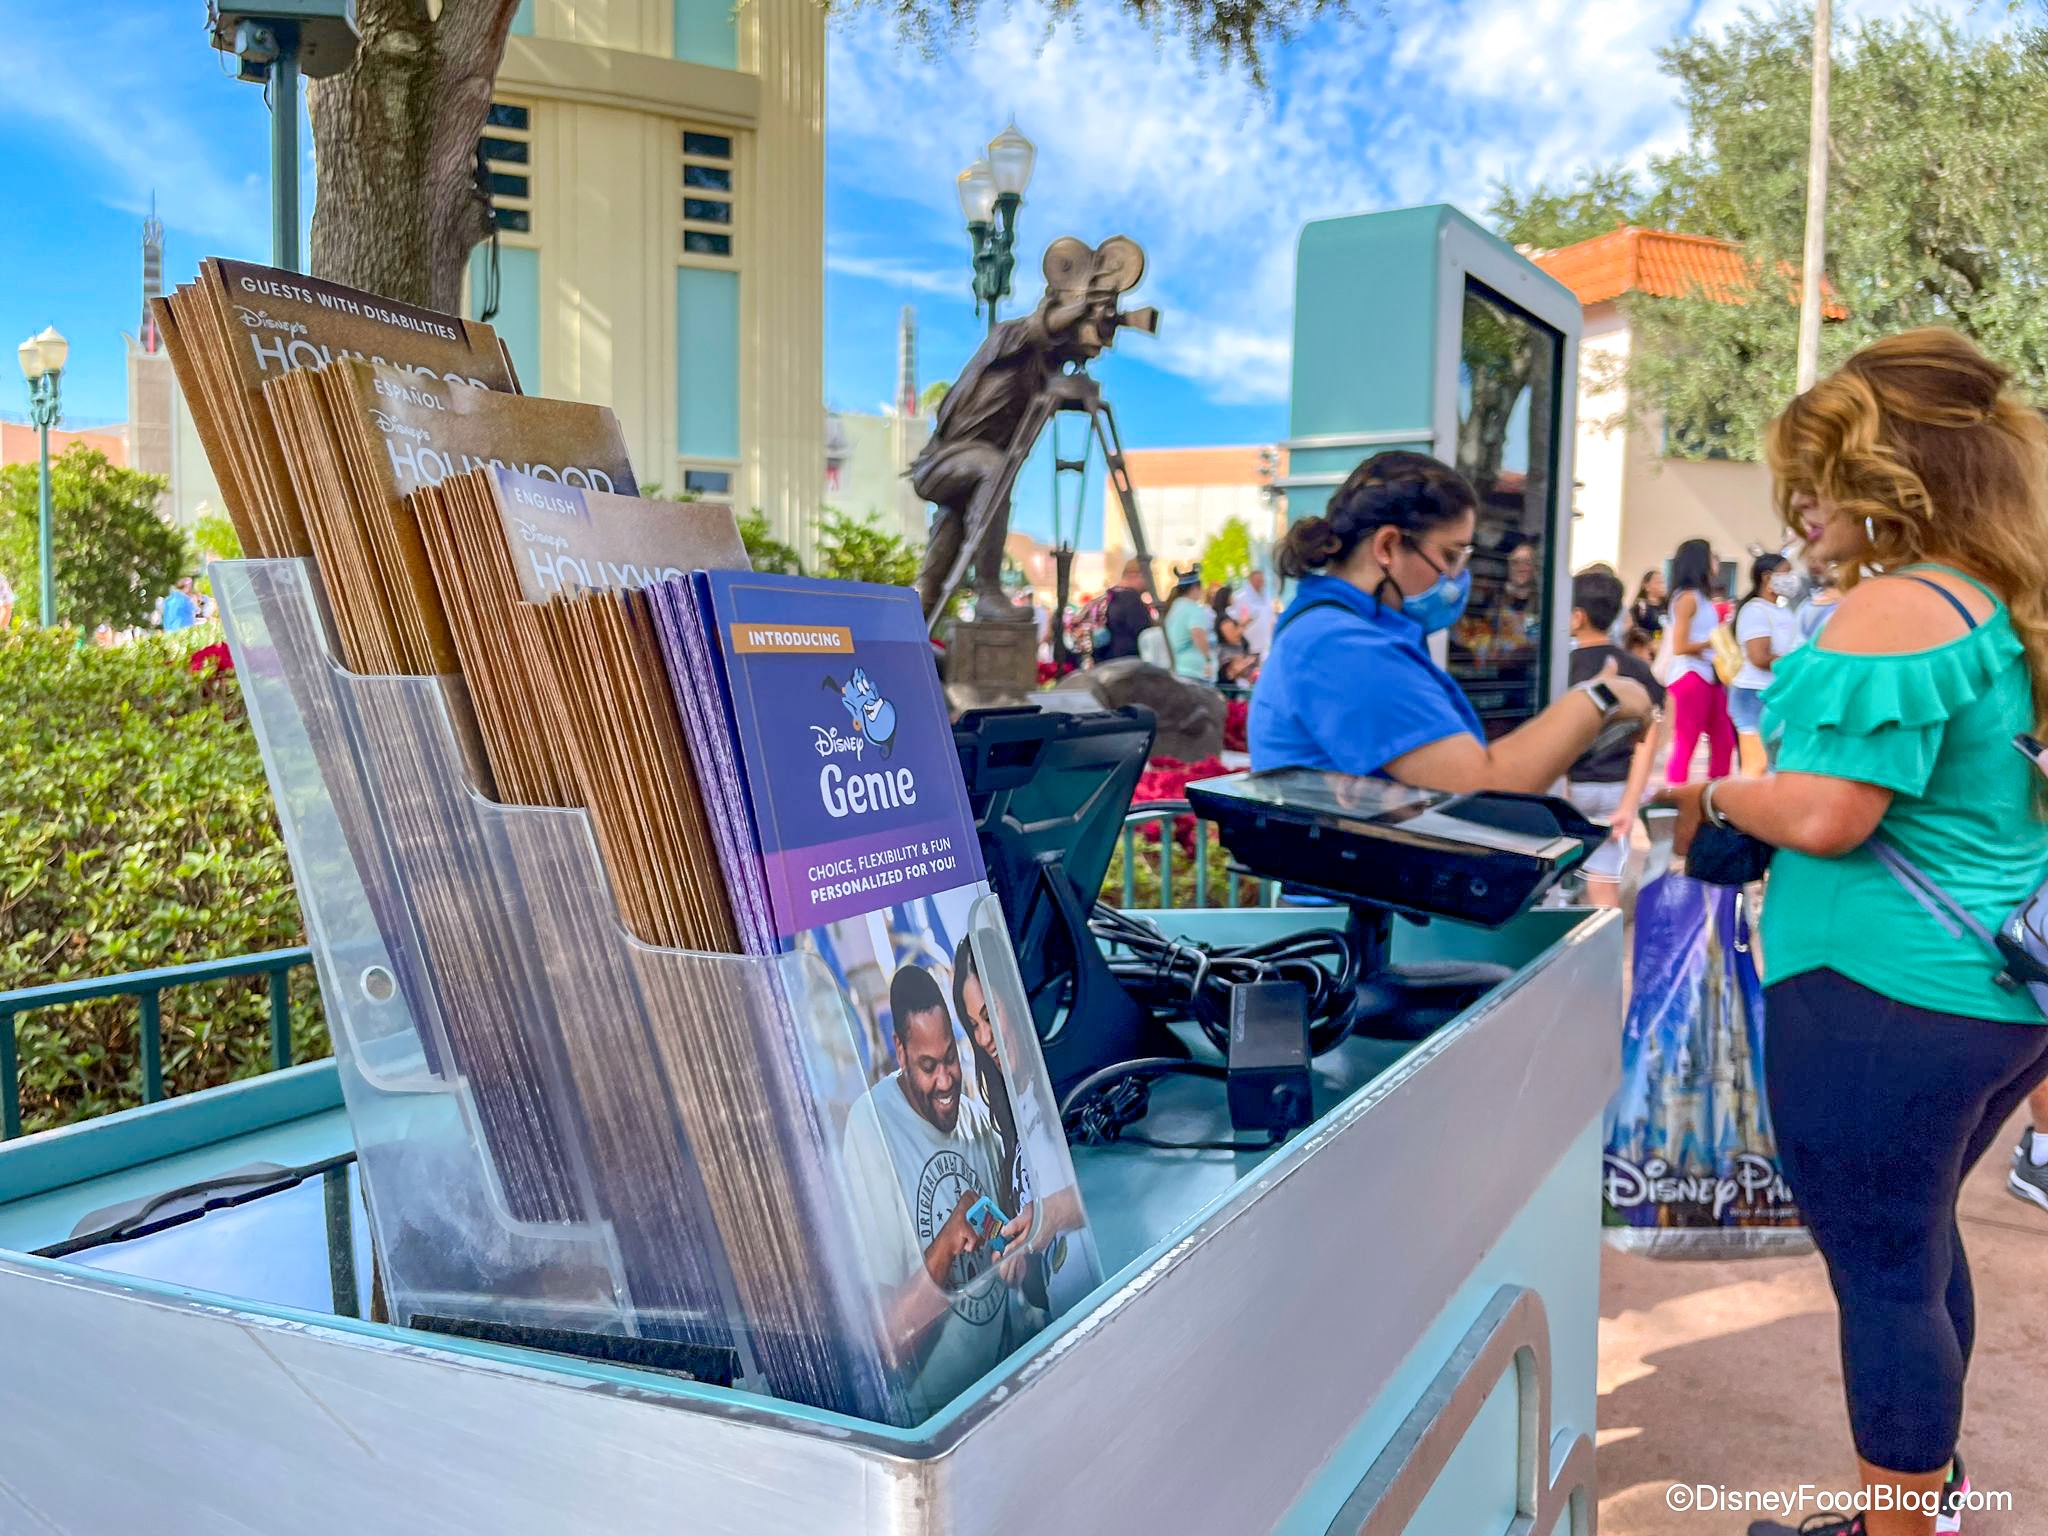 Where's best for shopping in Orlando? - Holiday Genie Blog